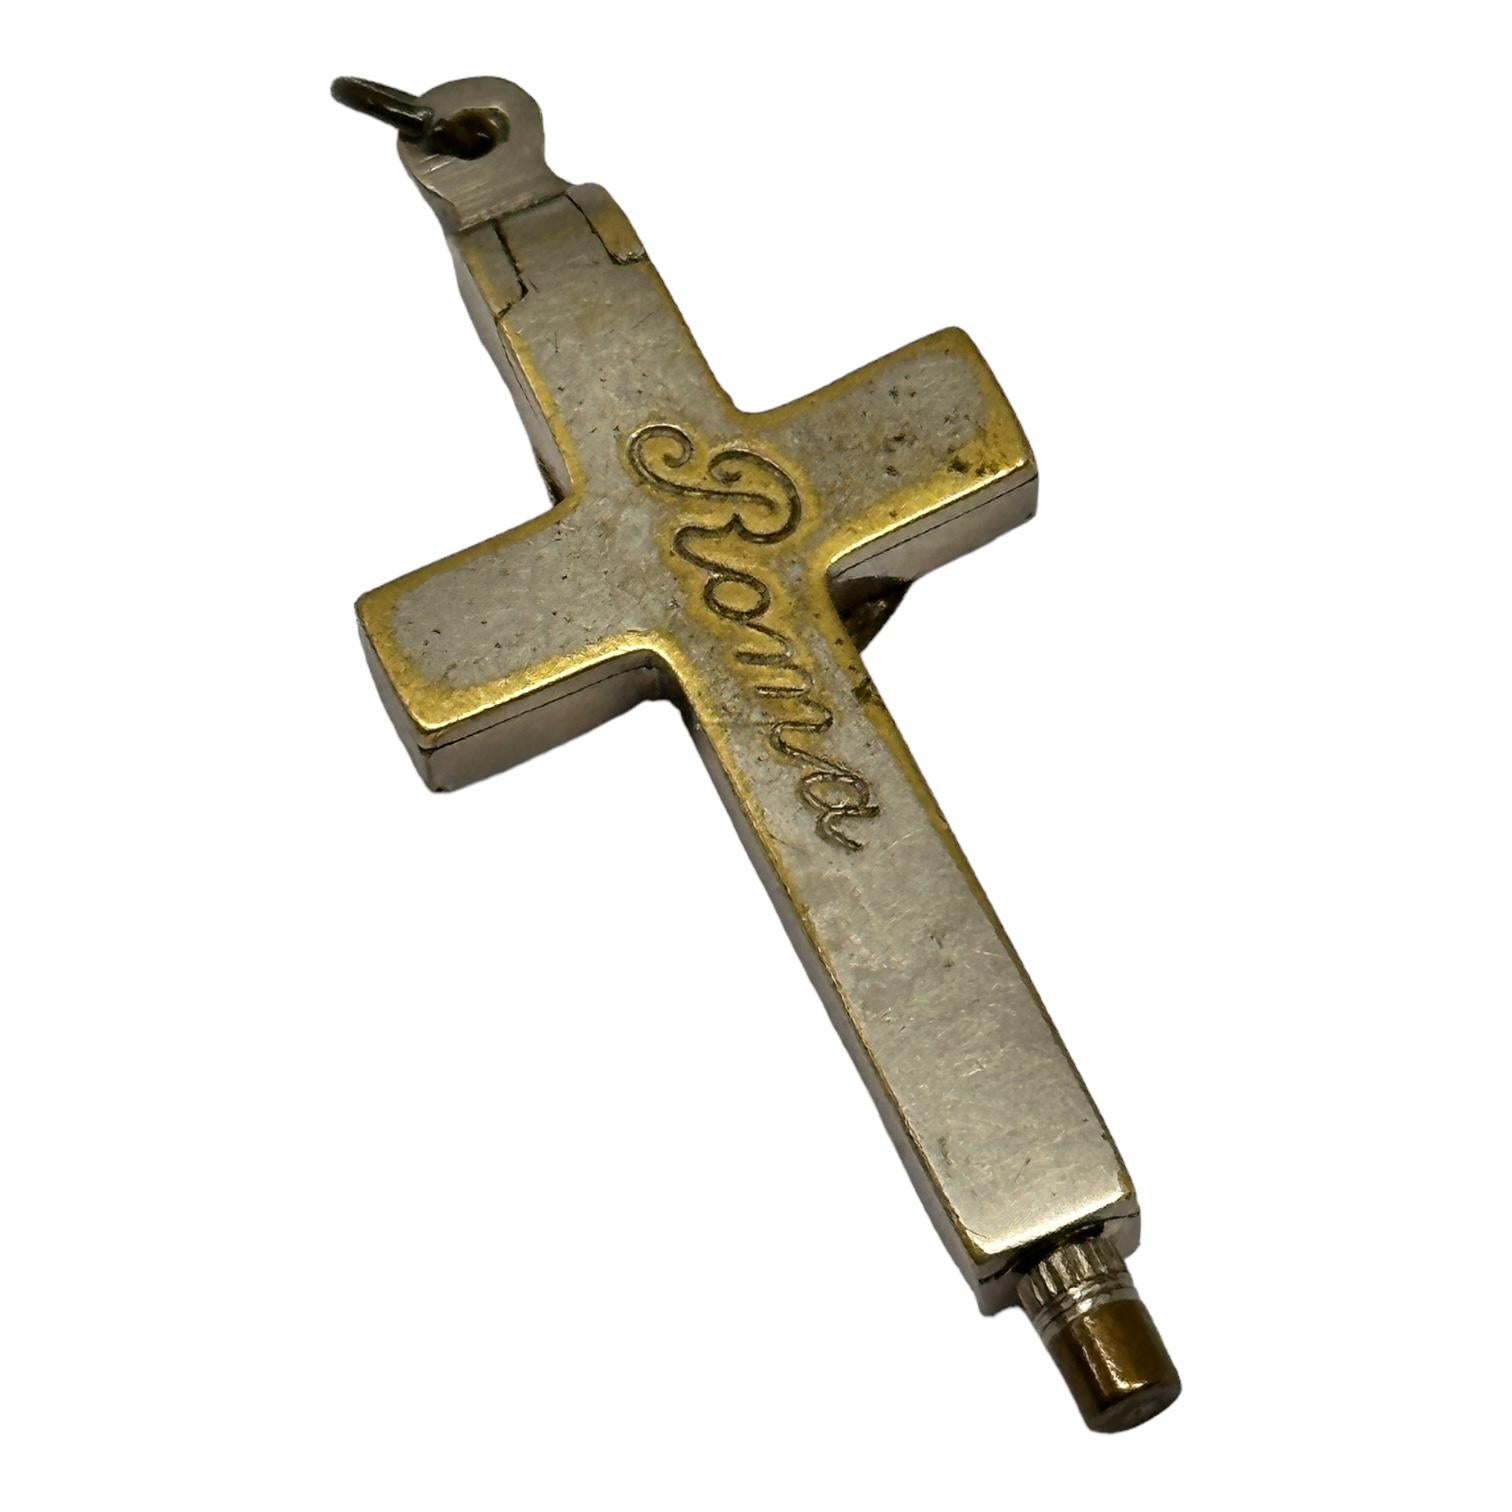 Hand-Crafted small Antique Catholic Reliquary Box Crucifix Pendant with Relics of Saints For Sale